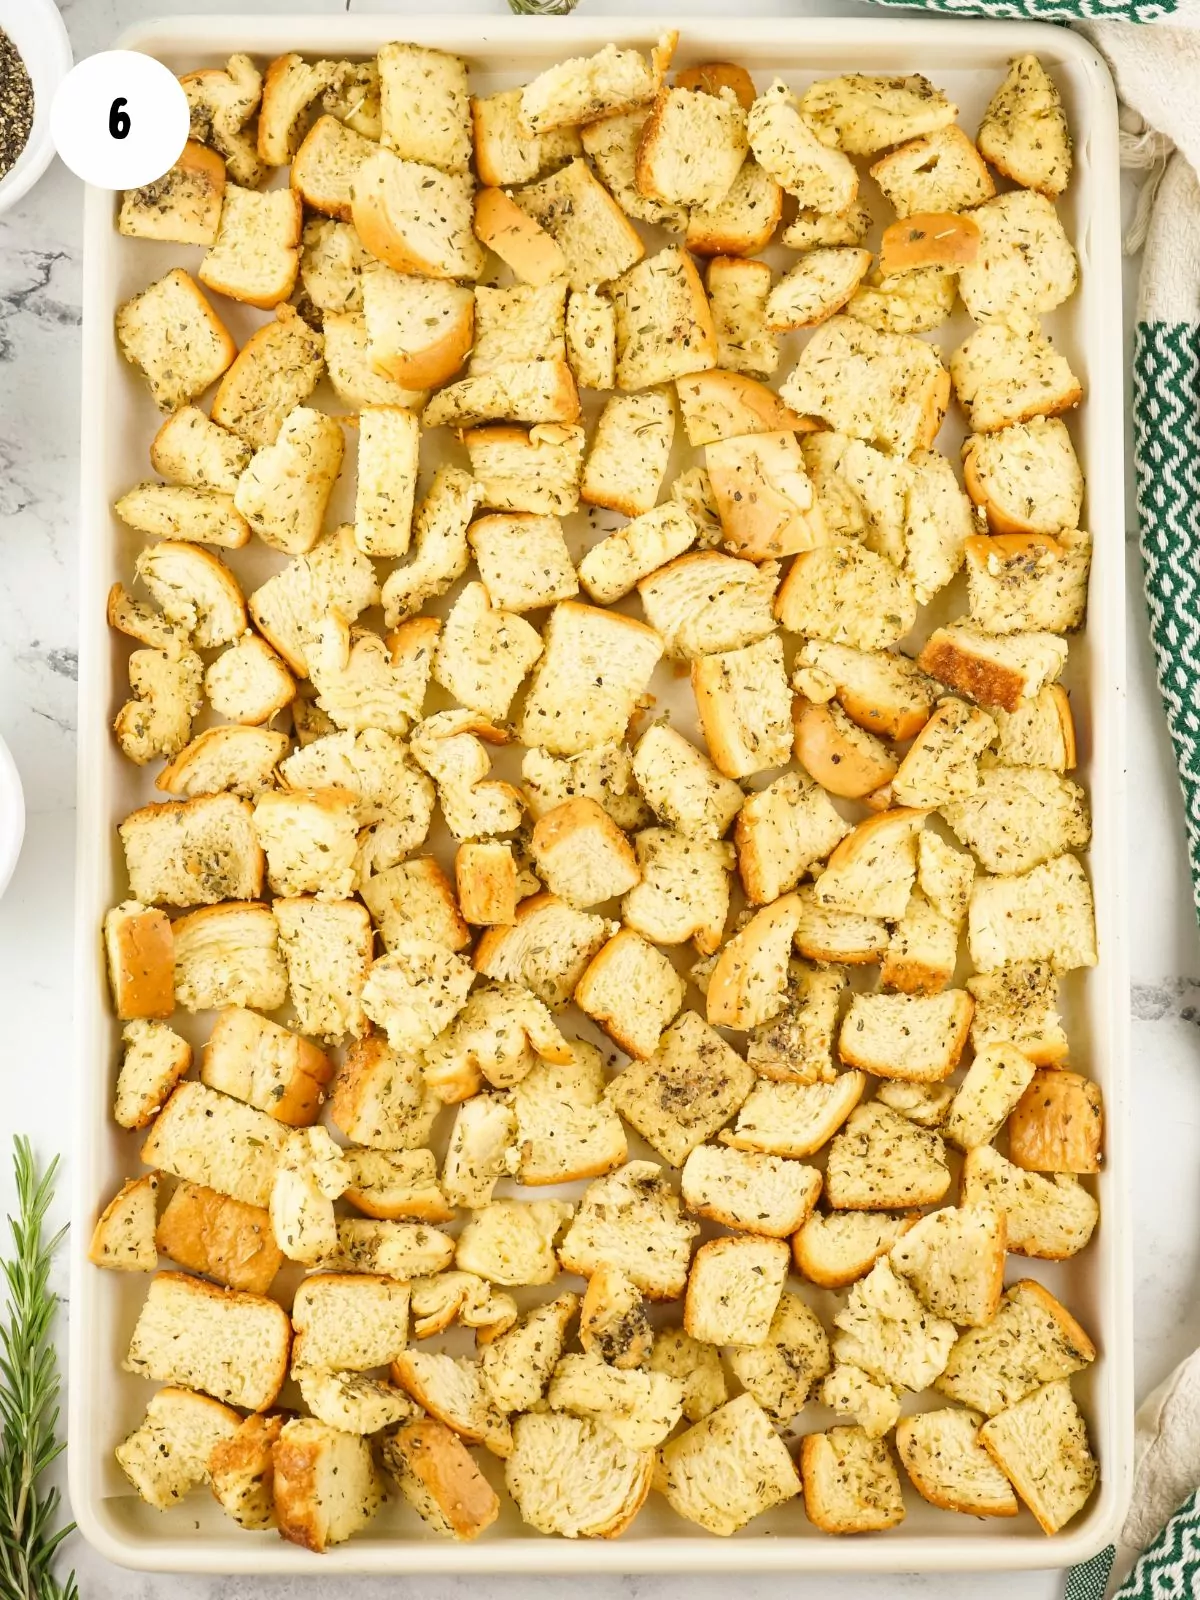 cubed bread with melted butter and herbs on baking tray.